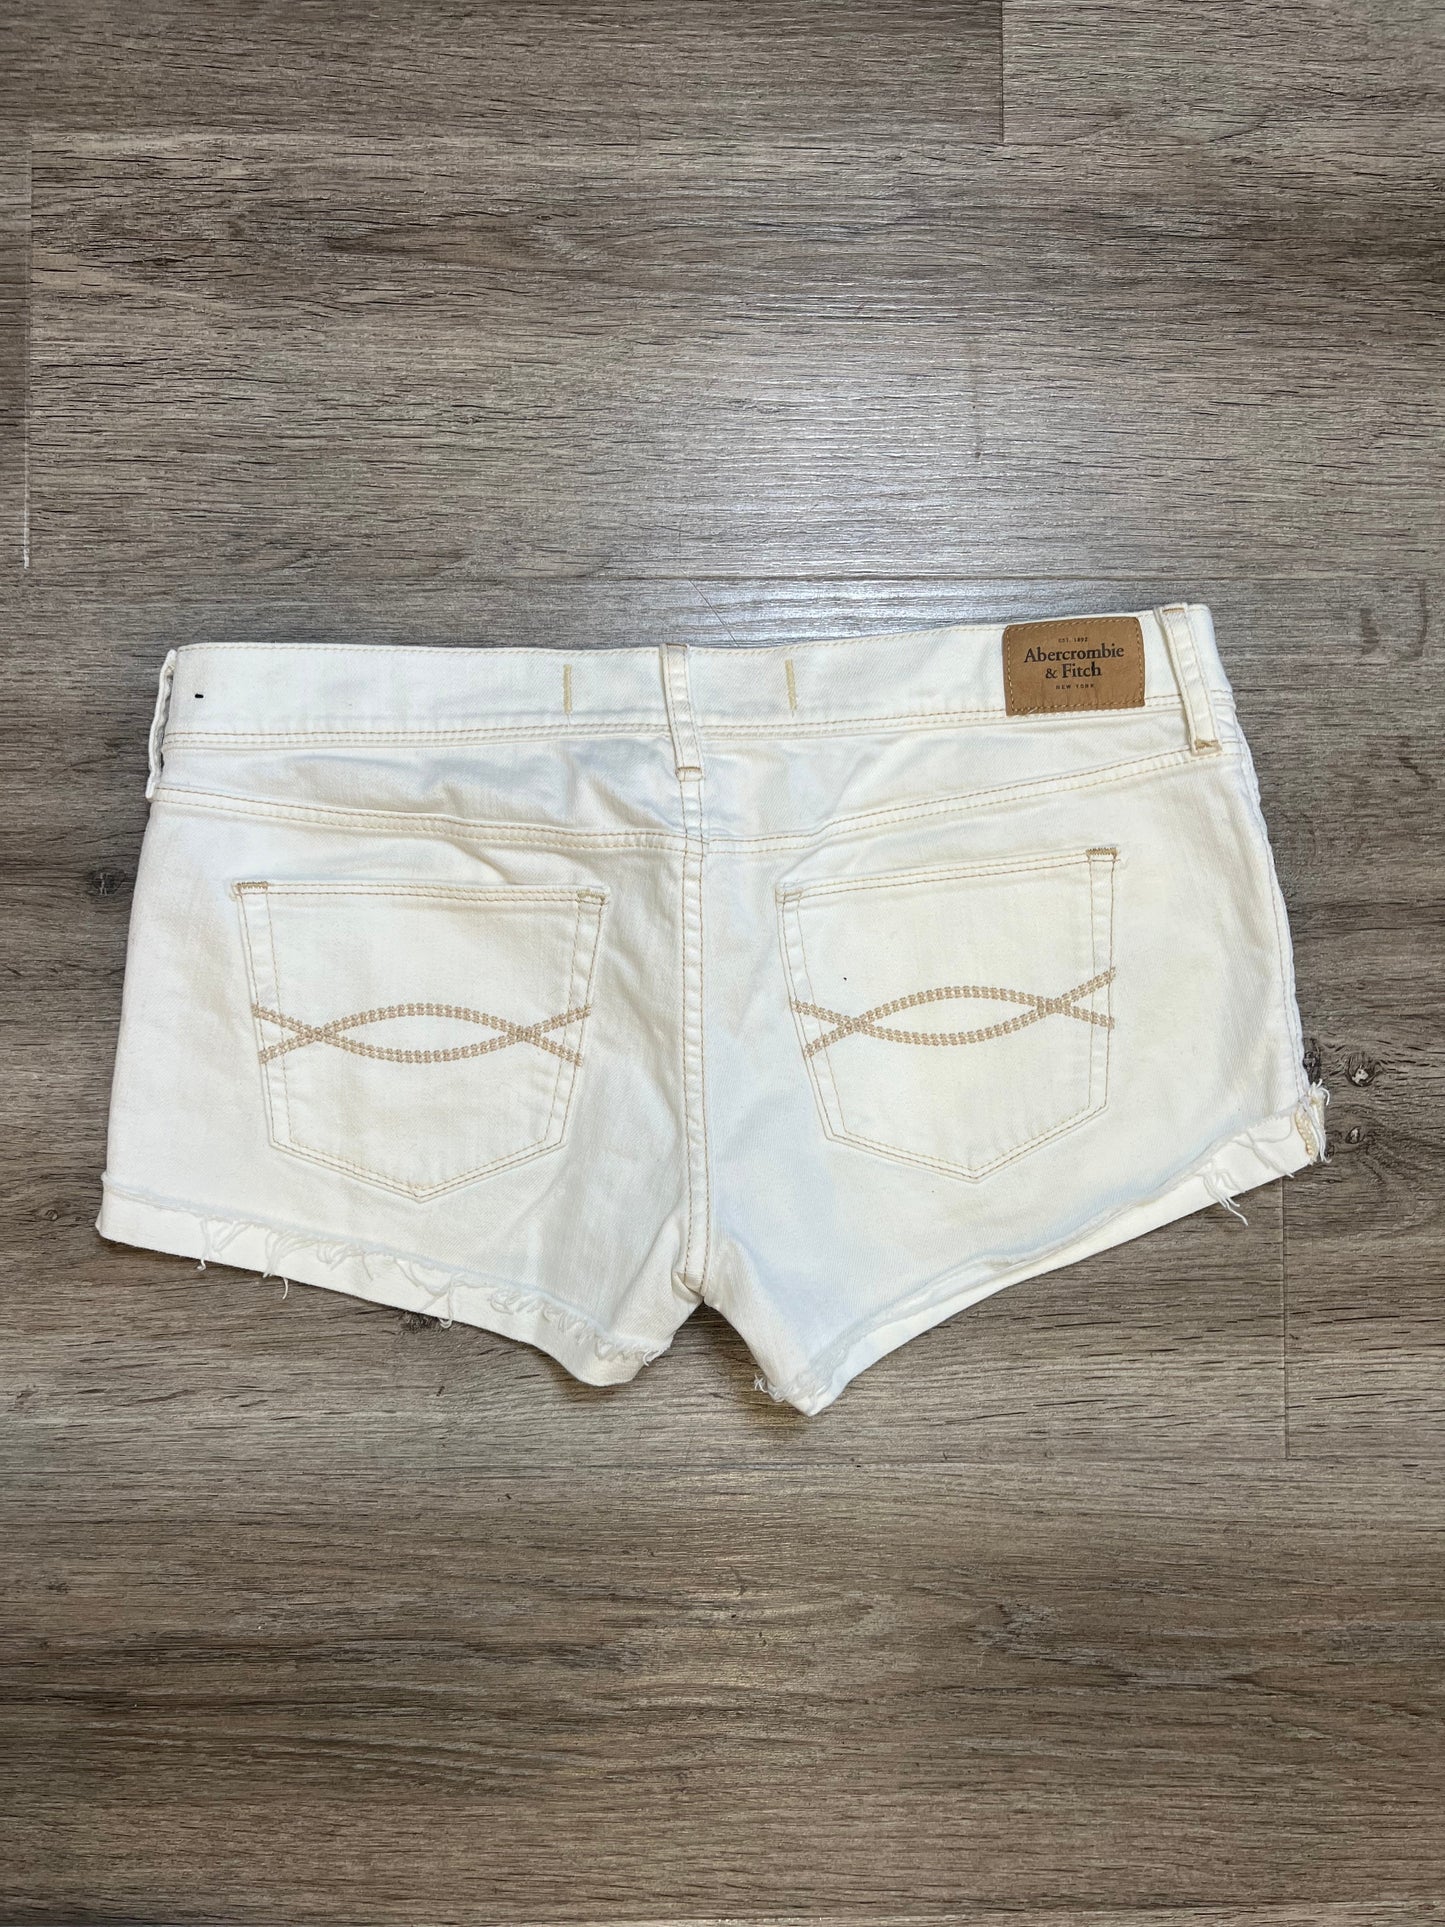 Shorts By Abercrombie And Fitch  Size: S